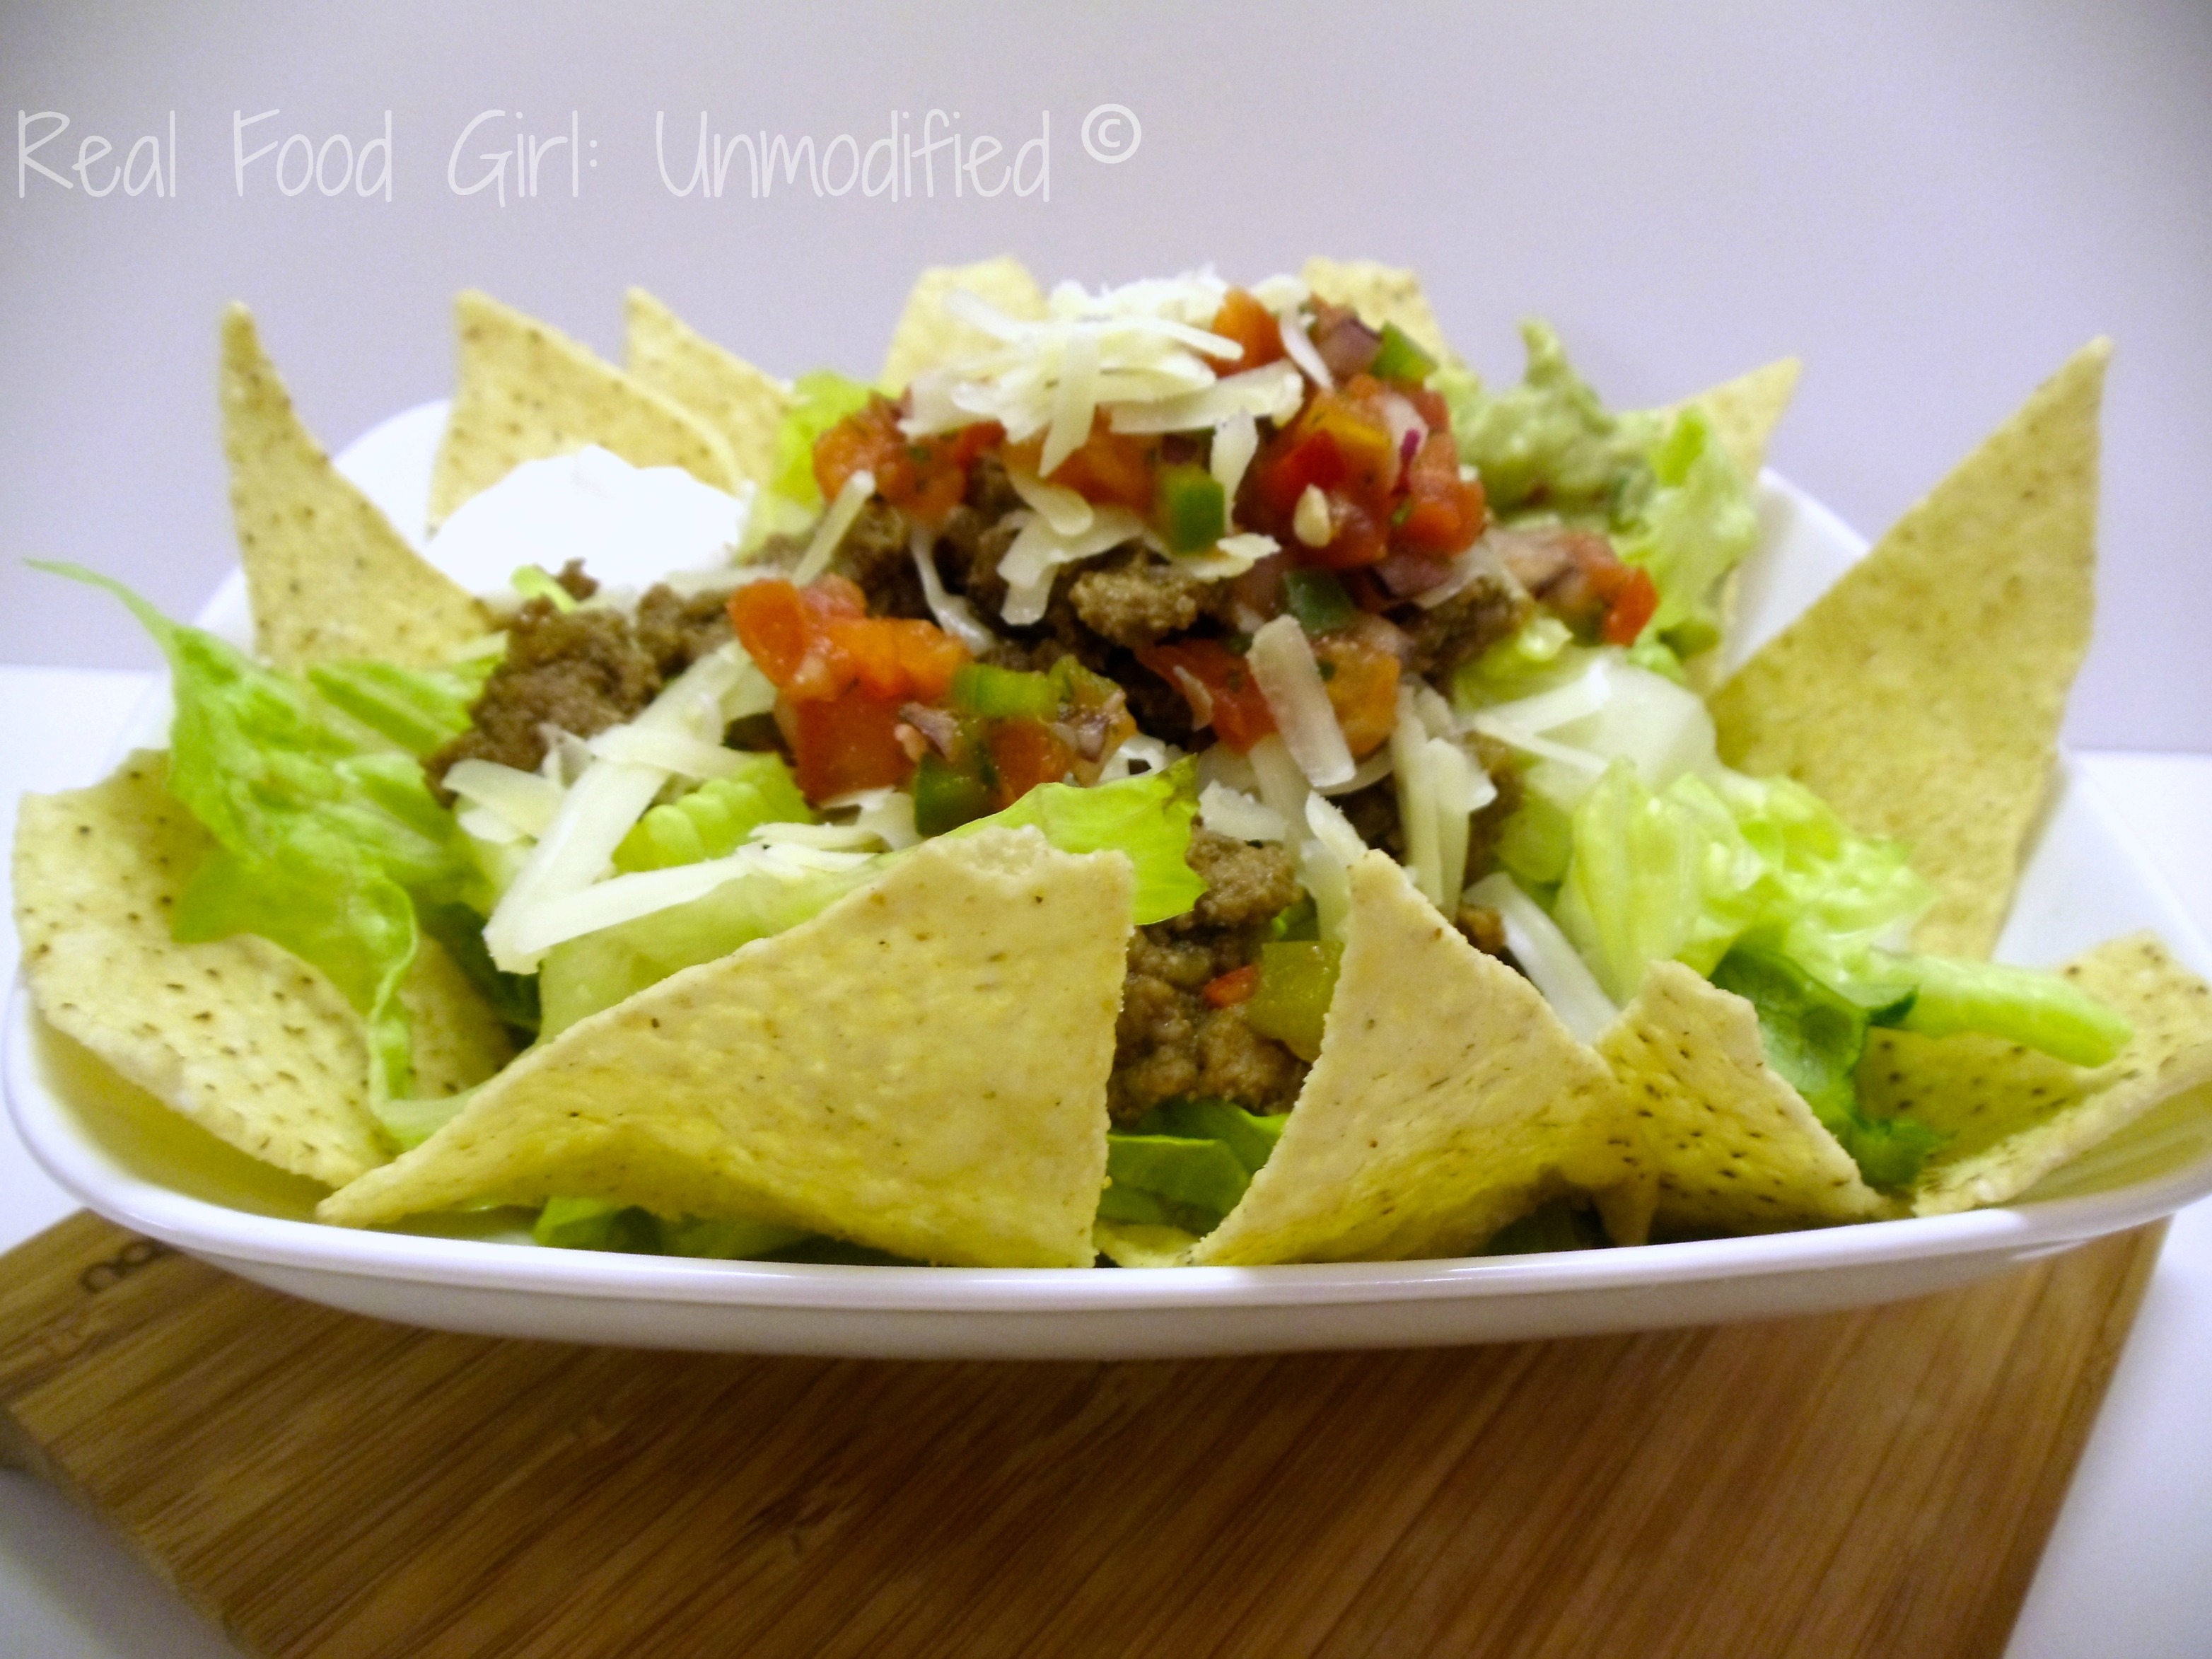 GMO-Free Tasty Taco Salad. Super flavorful taco meat made with organic grass fed beef, and fresh veggies! Perfect weeknight meal. Real Food Girl: Unmodified